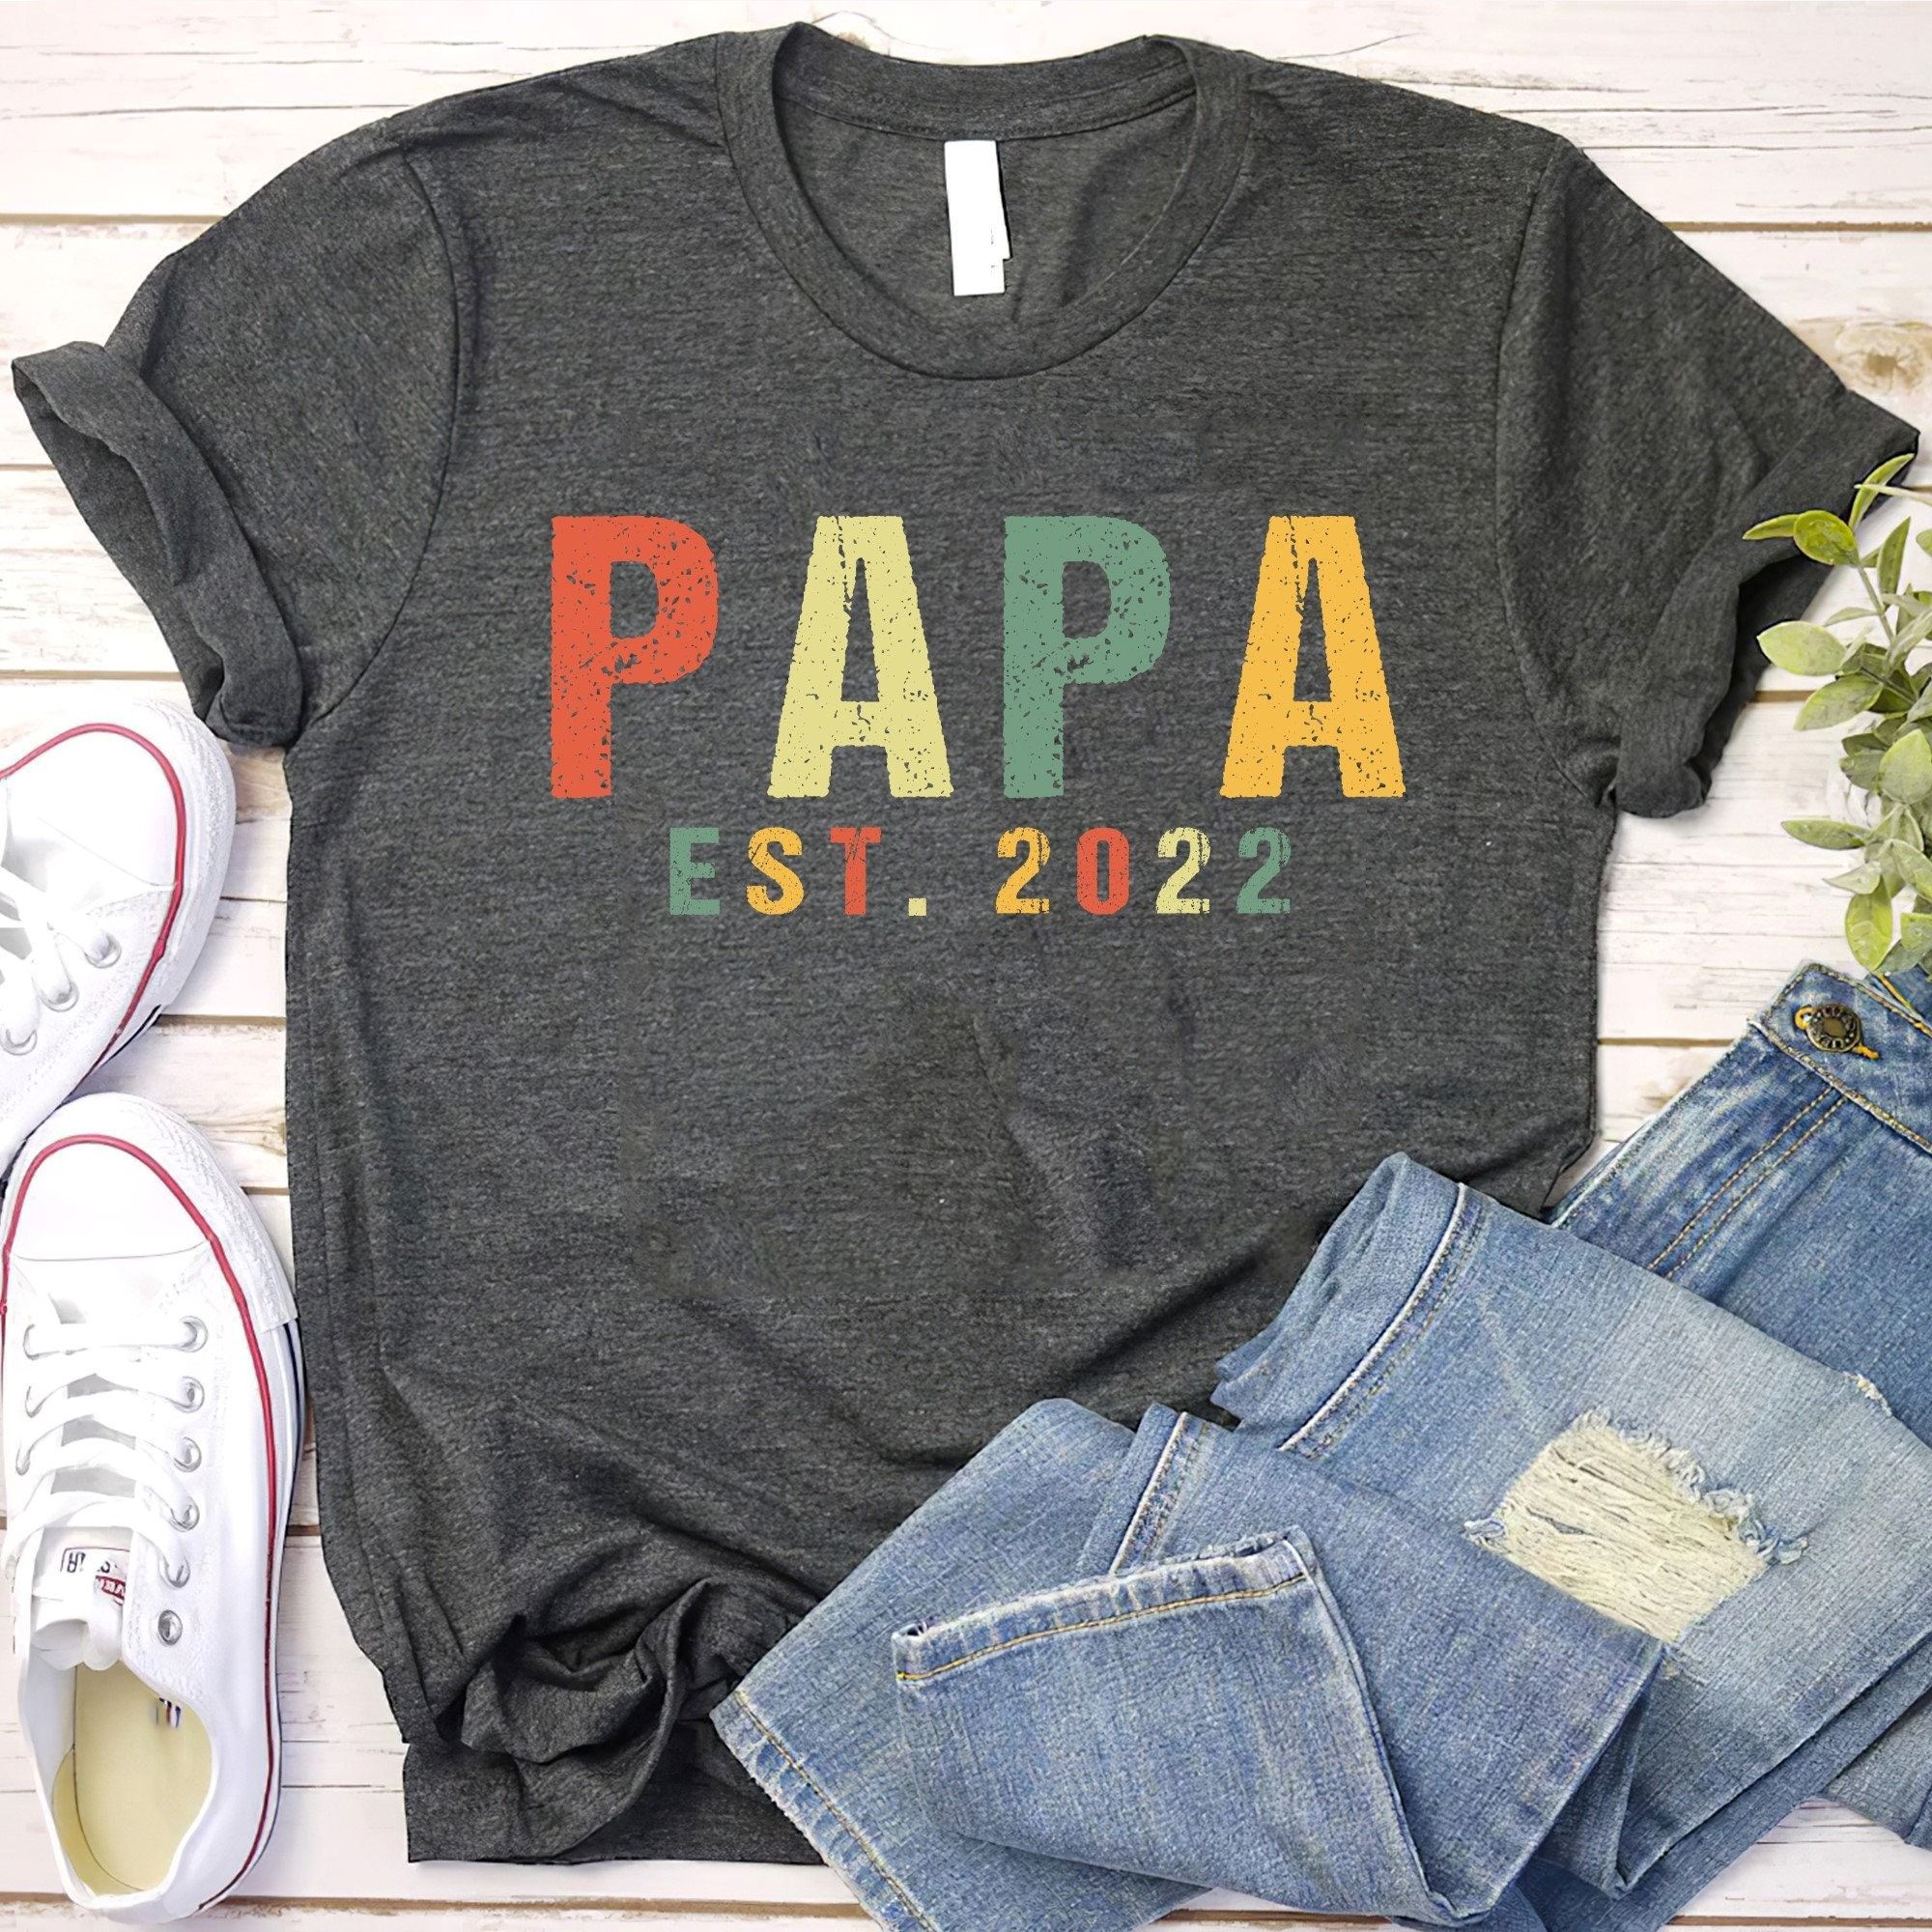 Promotions Dad Est Shirt Dad Tshirt Fathers Day Shirt Dada Shirt Birthday Gift For Dad New Dad Shirt Father Day Gift 